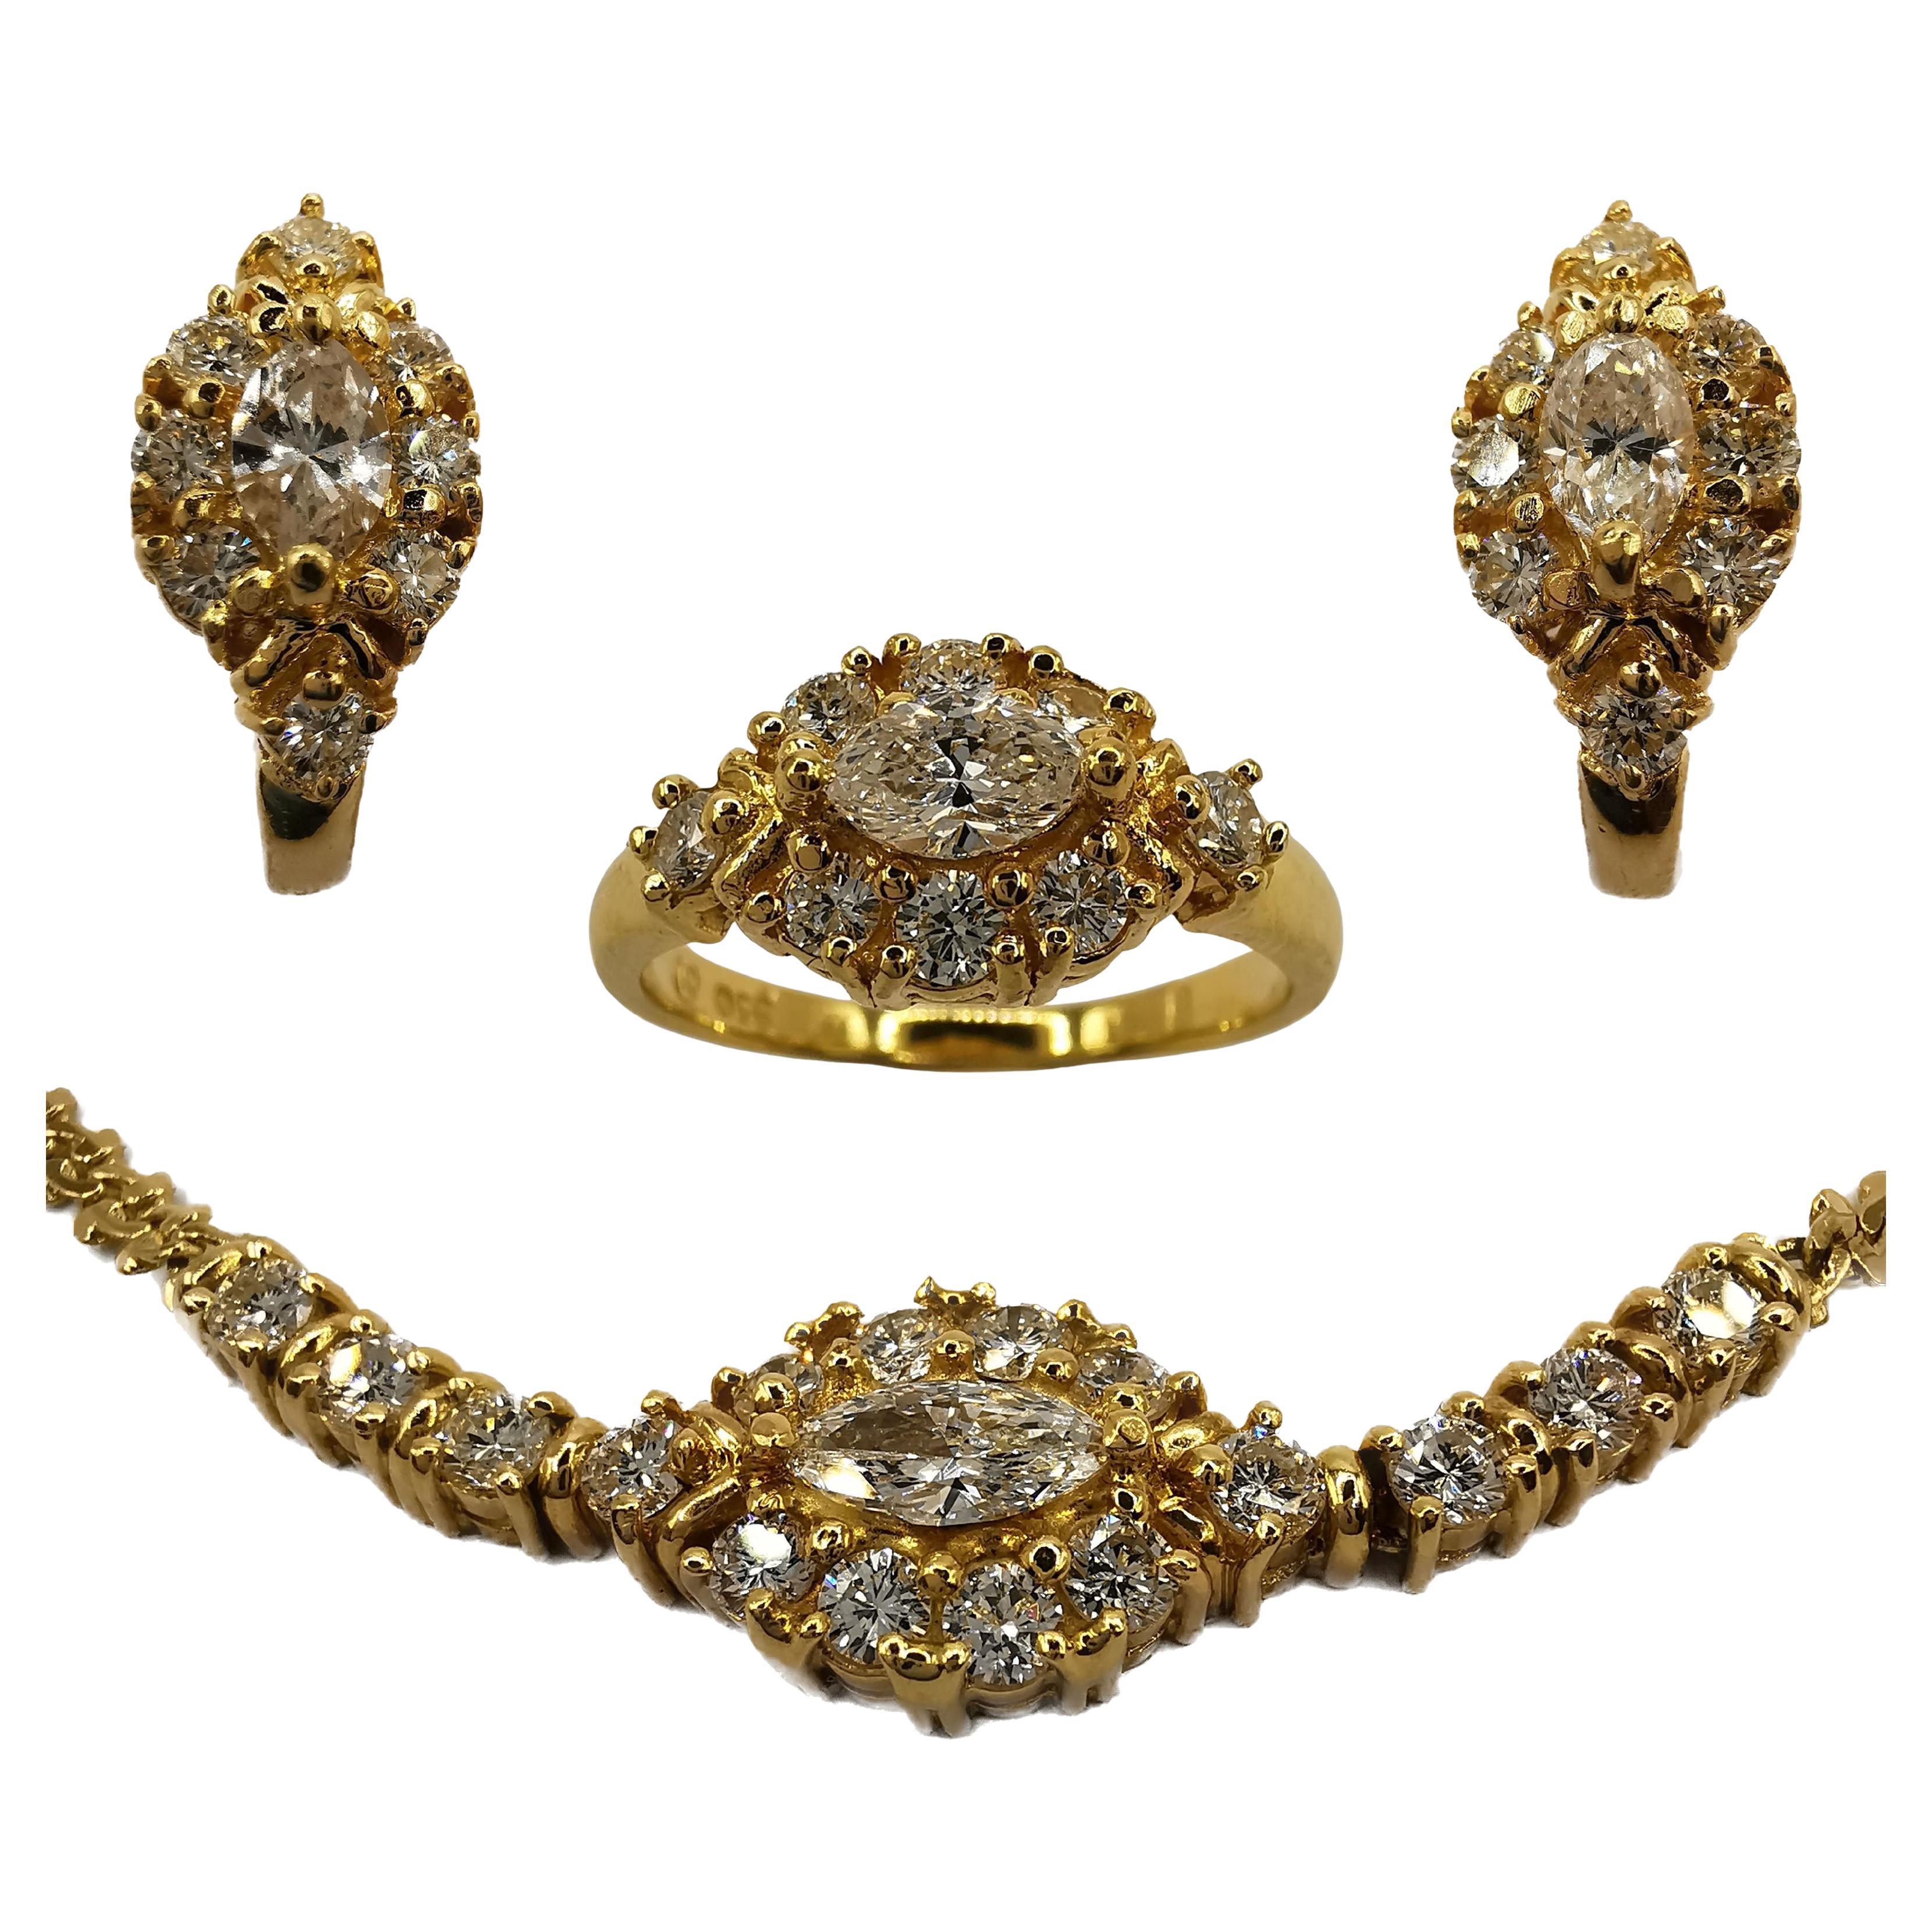 Vintage 2.89ct Marquise Diamond Cluster 18-20k Gold Ring, Earrings, Necklace Set For Sale